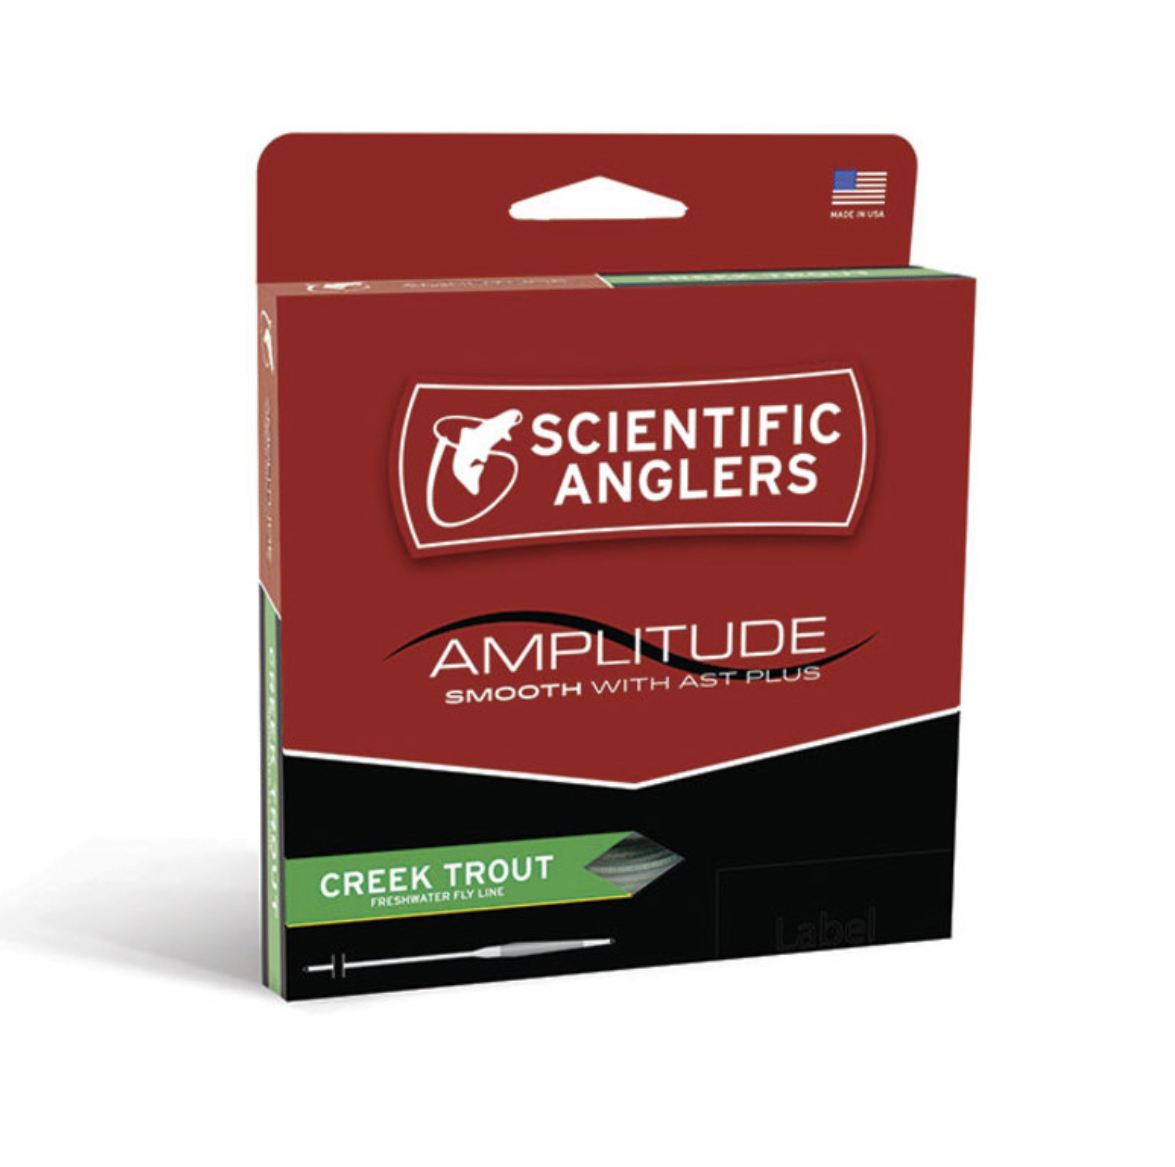 Scientific Anglers Amplitude Smooth Creek Trout